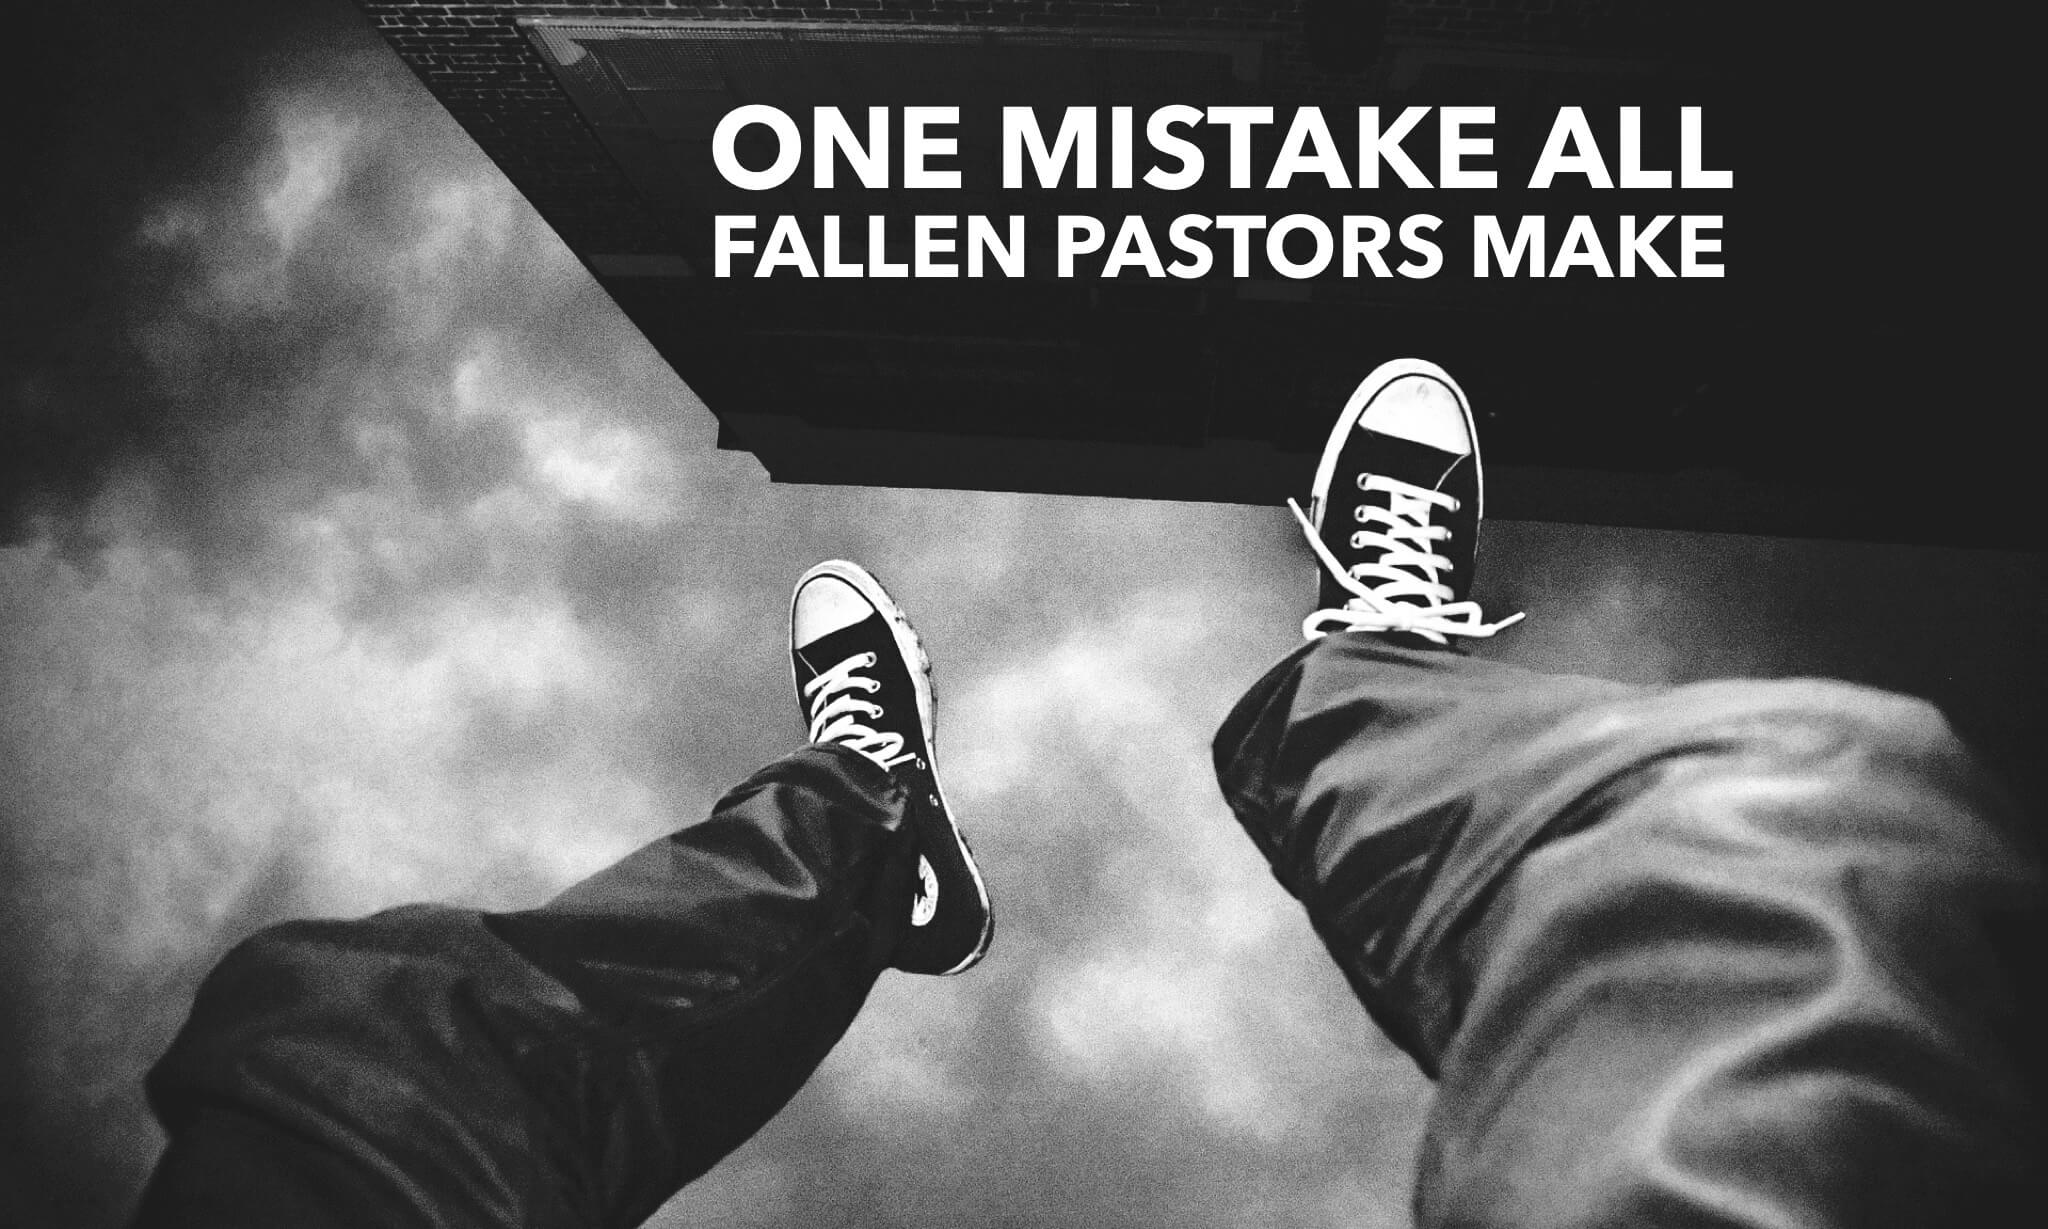 The One Mistake All Fallen Pastors Make